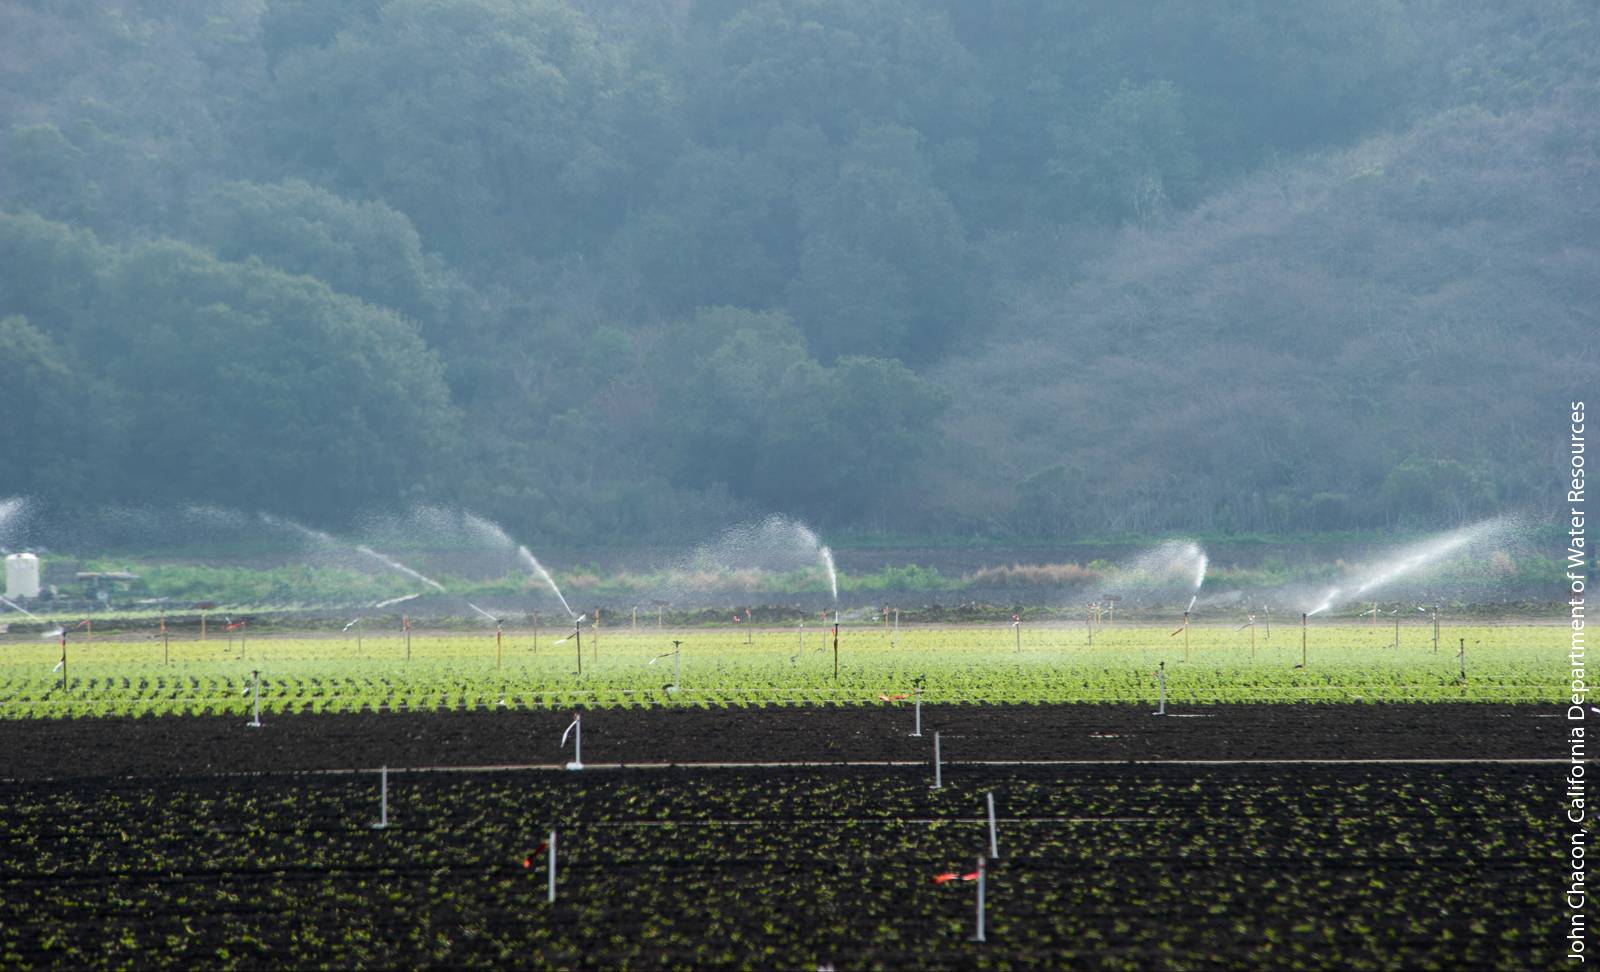 Agricultural pollution affects many water bodies on California's Central Coast and has prompted regulatory action. This article examines the perspectives of Central Coast growers on water quality issues and on the many groups involved in water quality regulation and management, including agricultural groups and the Central Coast Regional Water Quality Control Board.